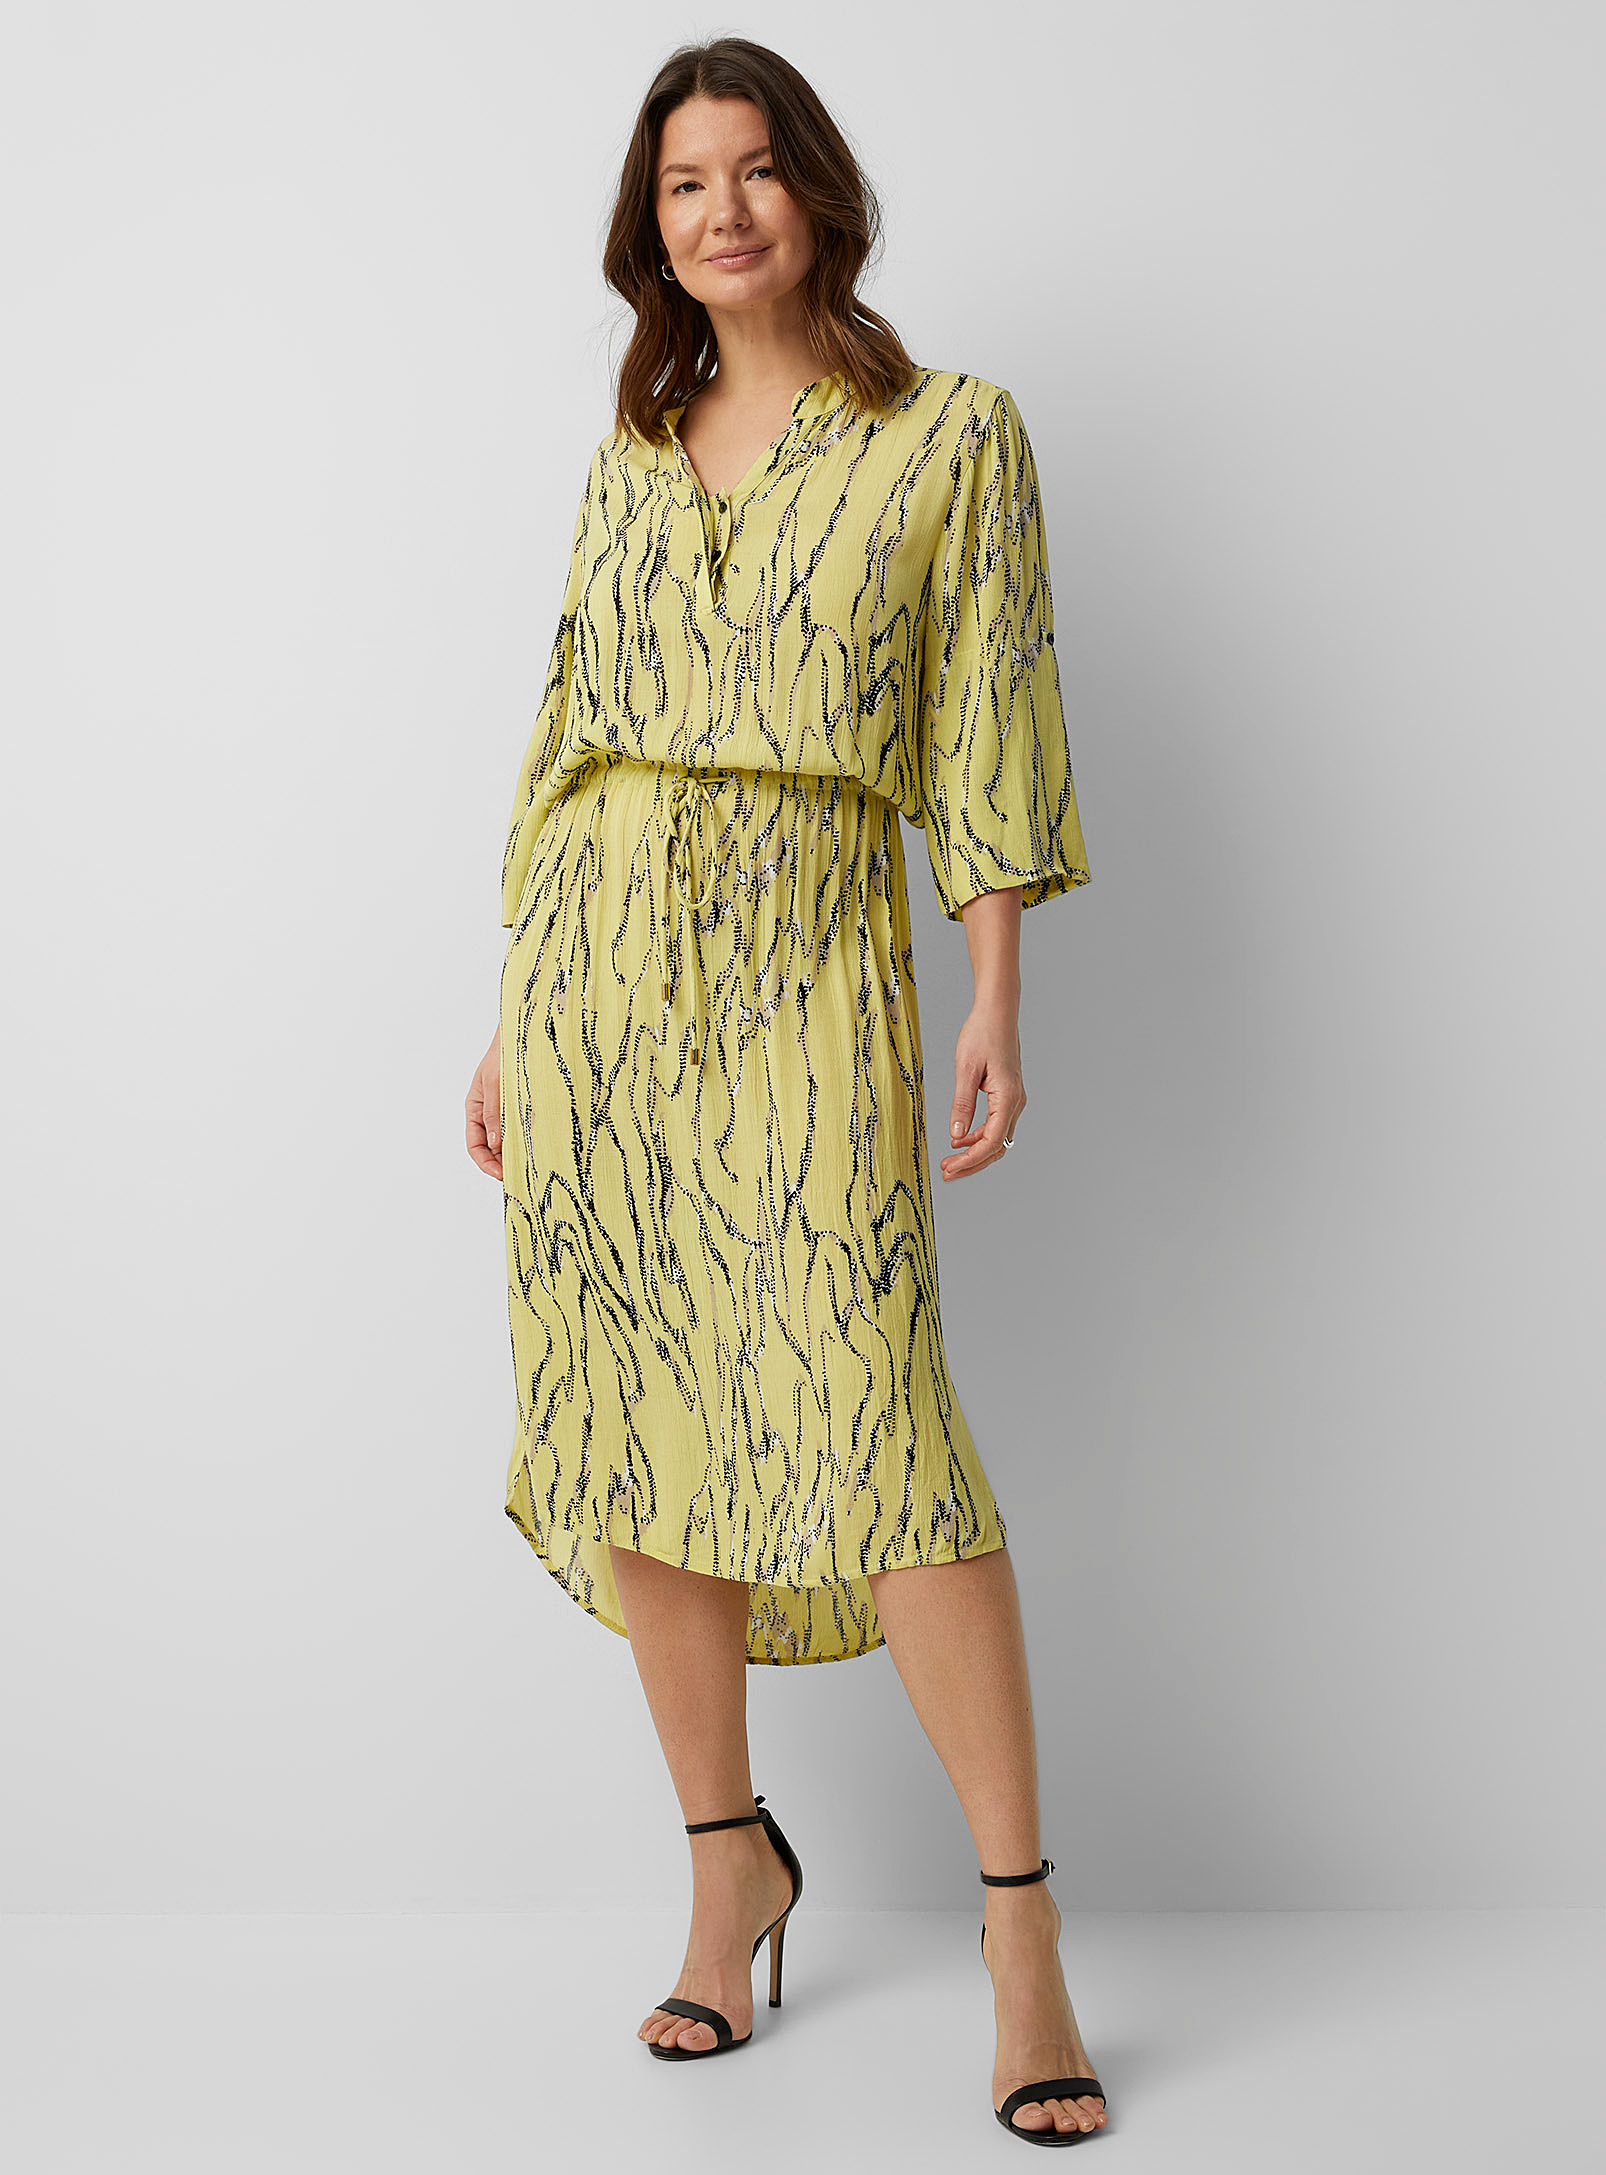 Soaked Luxury - Zaya abstract radiance cinched dress